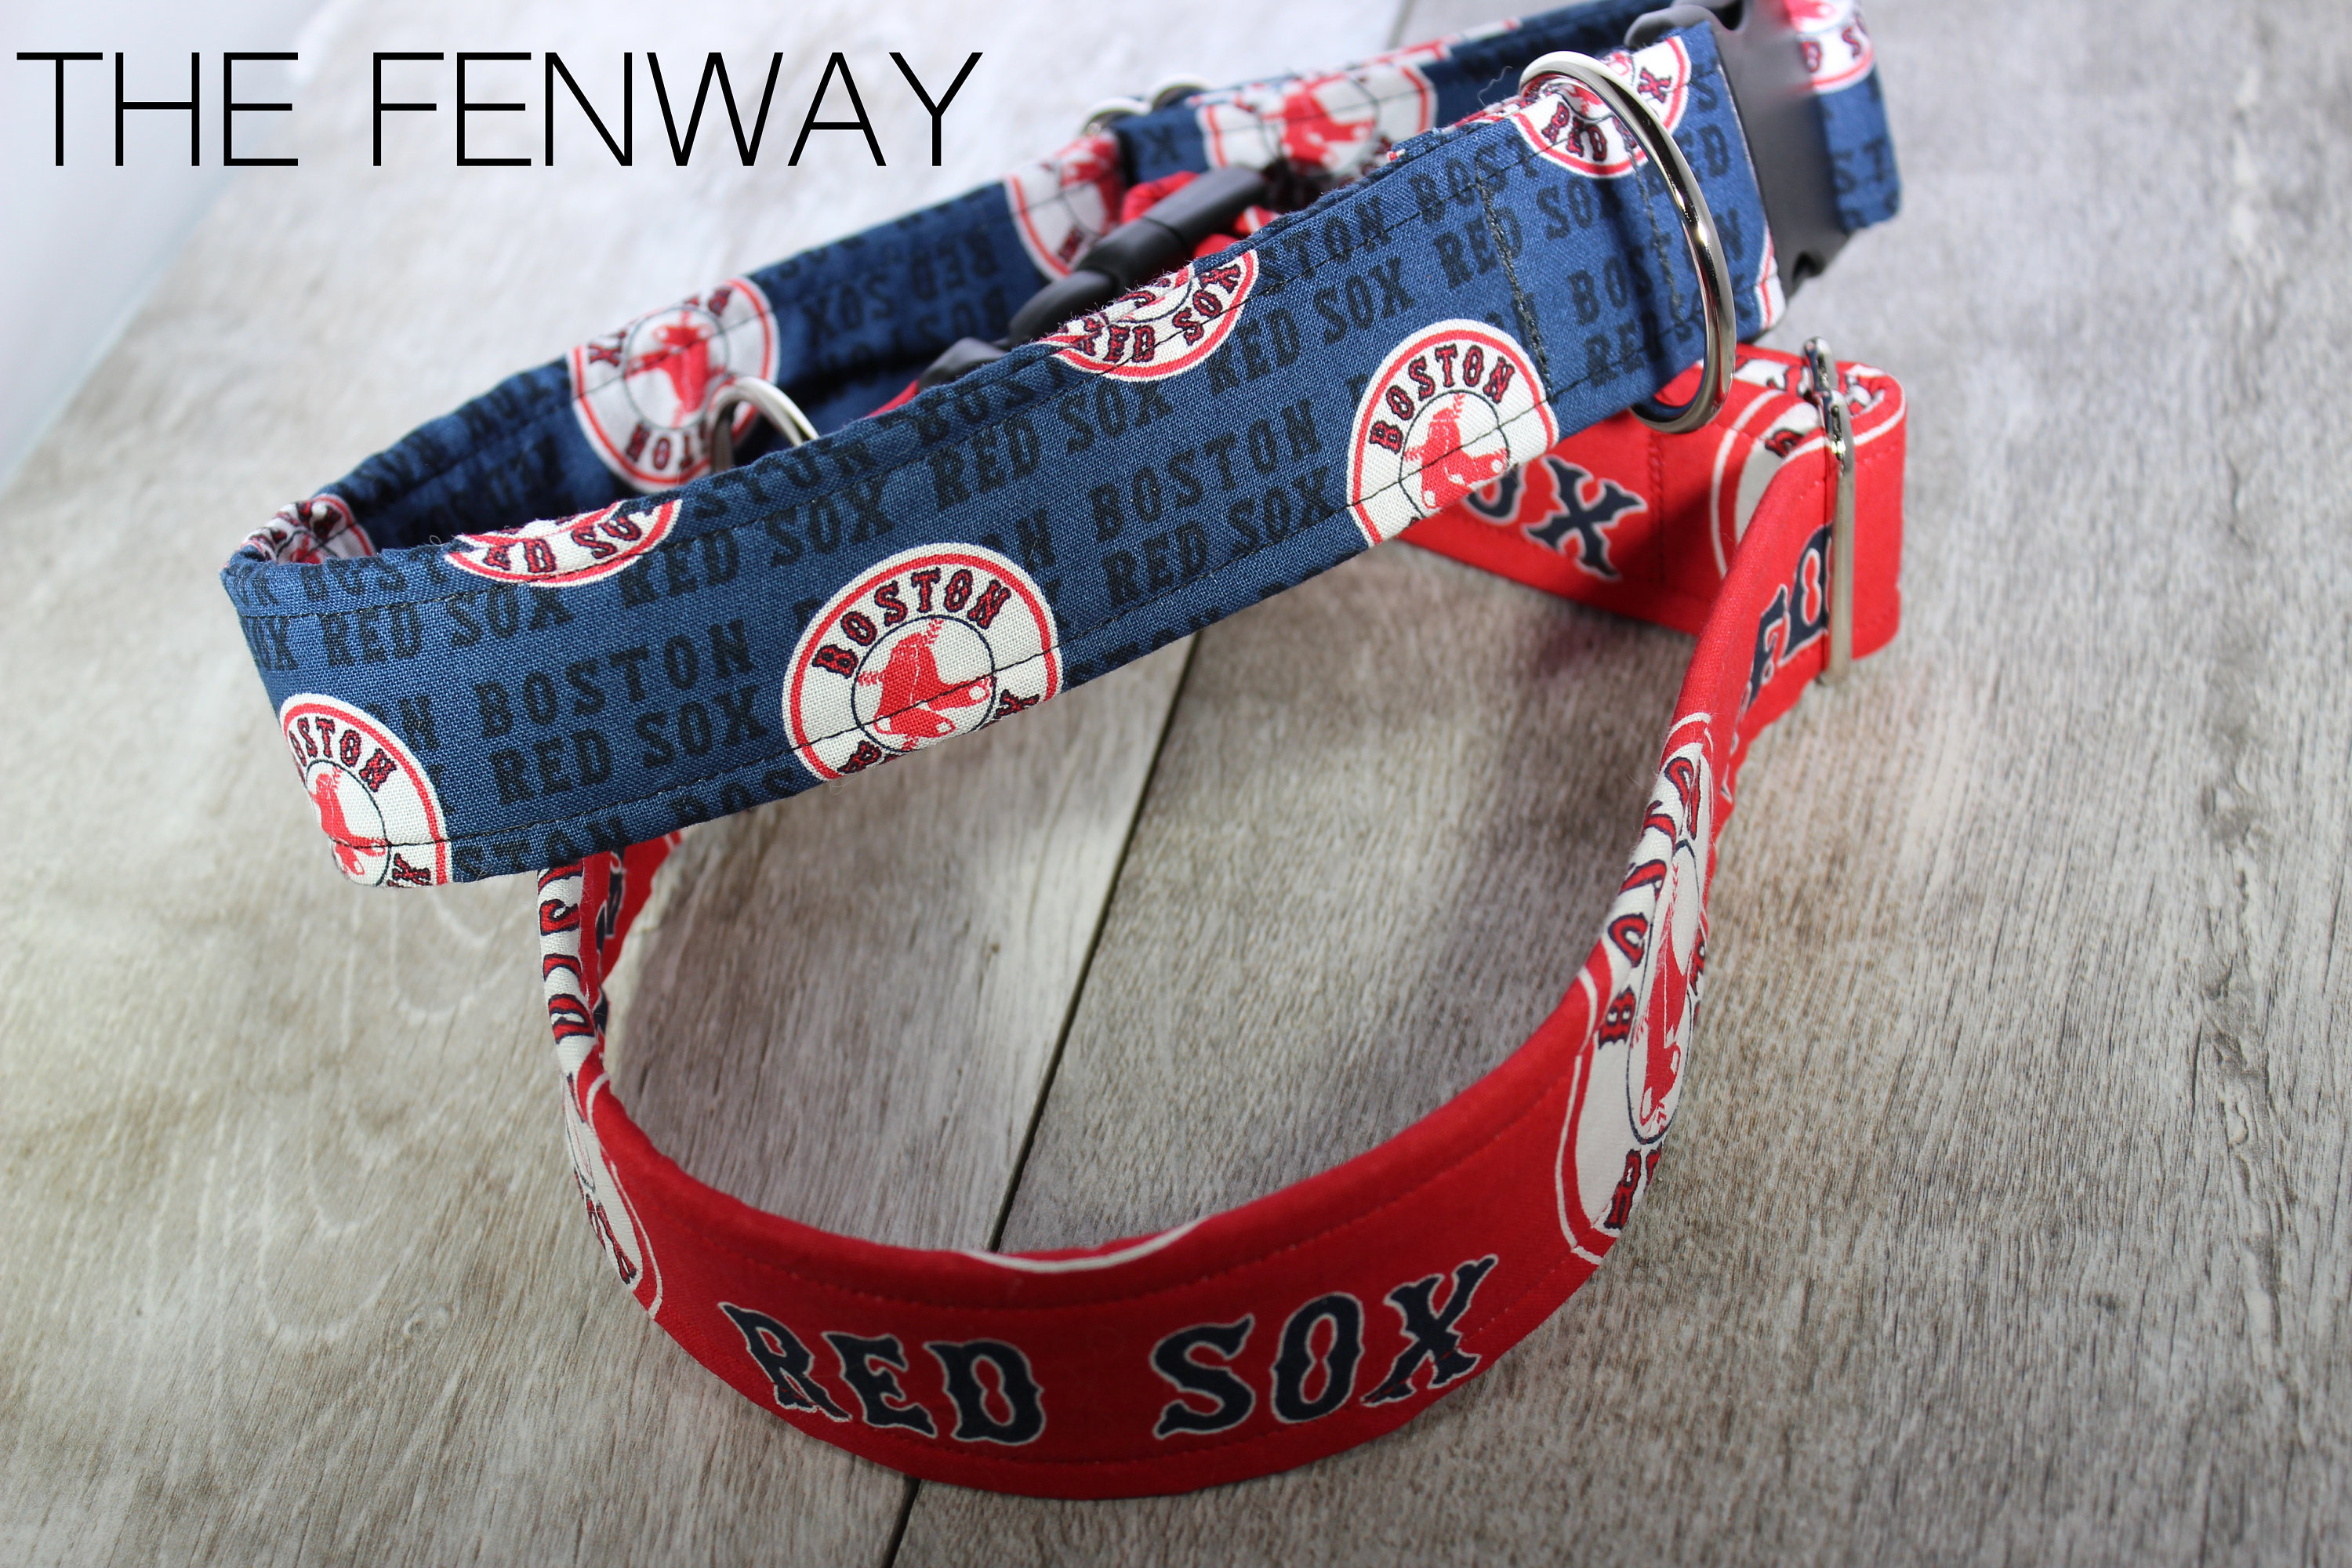 THE FENWAY Red Sox Dog Collar 